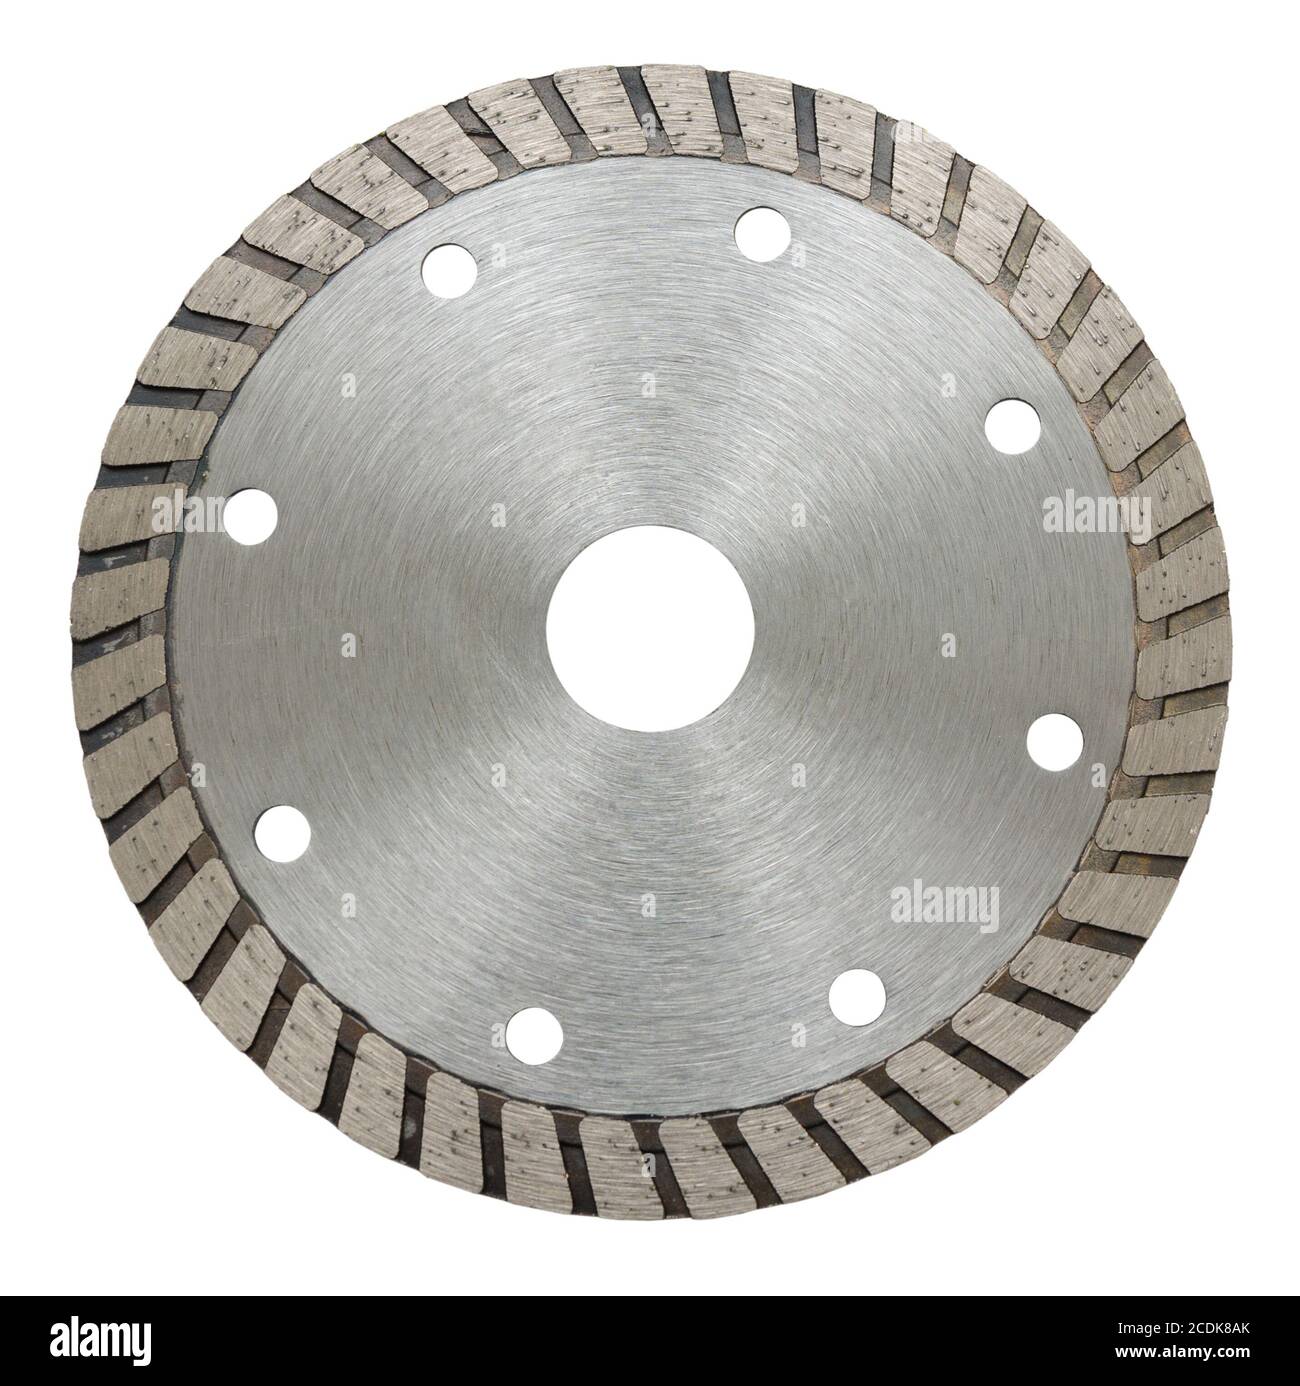 abrasive disc for metal cutting for eccentric instruments Stock Photo